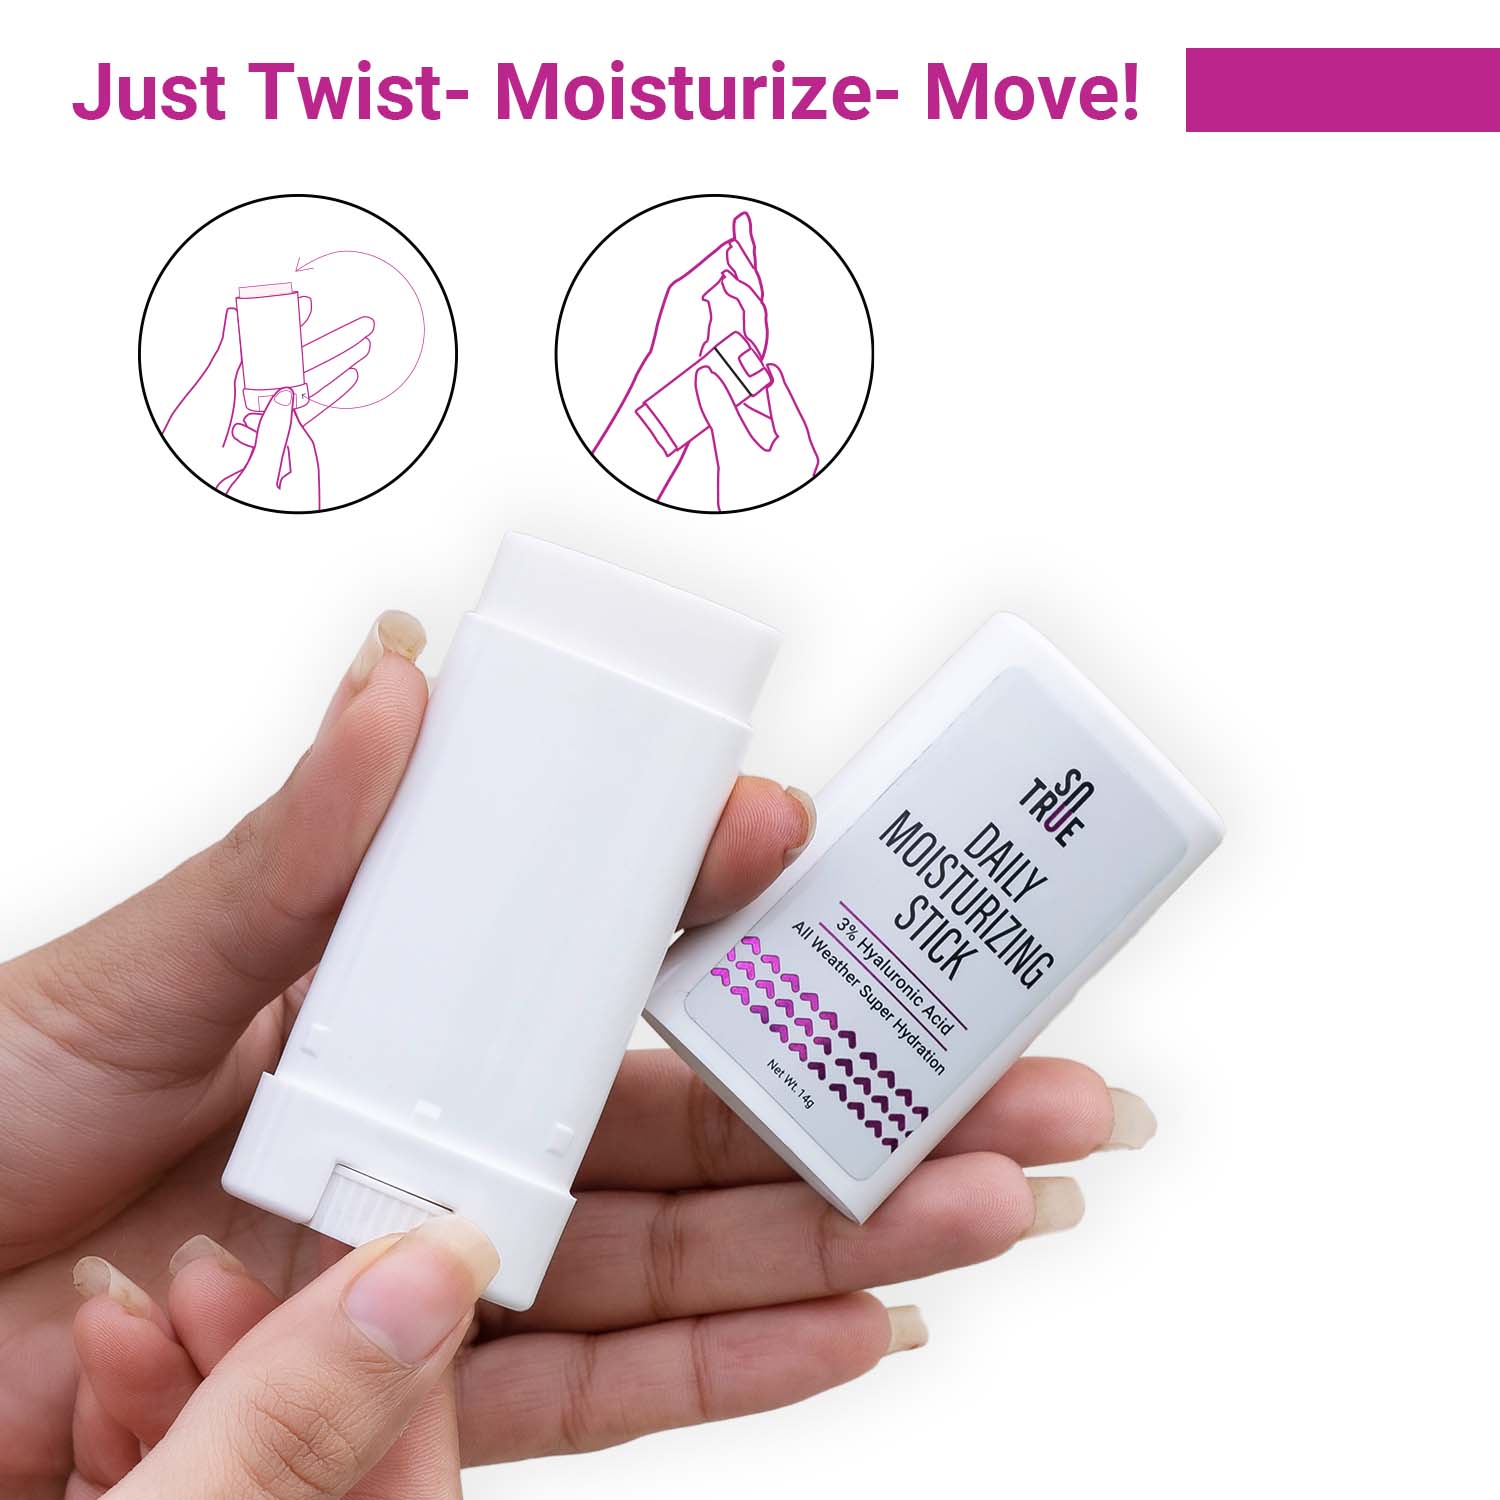 Daily Moisturizing Stick with 3% Hyaluronic Acid 14 g